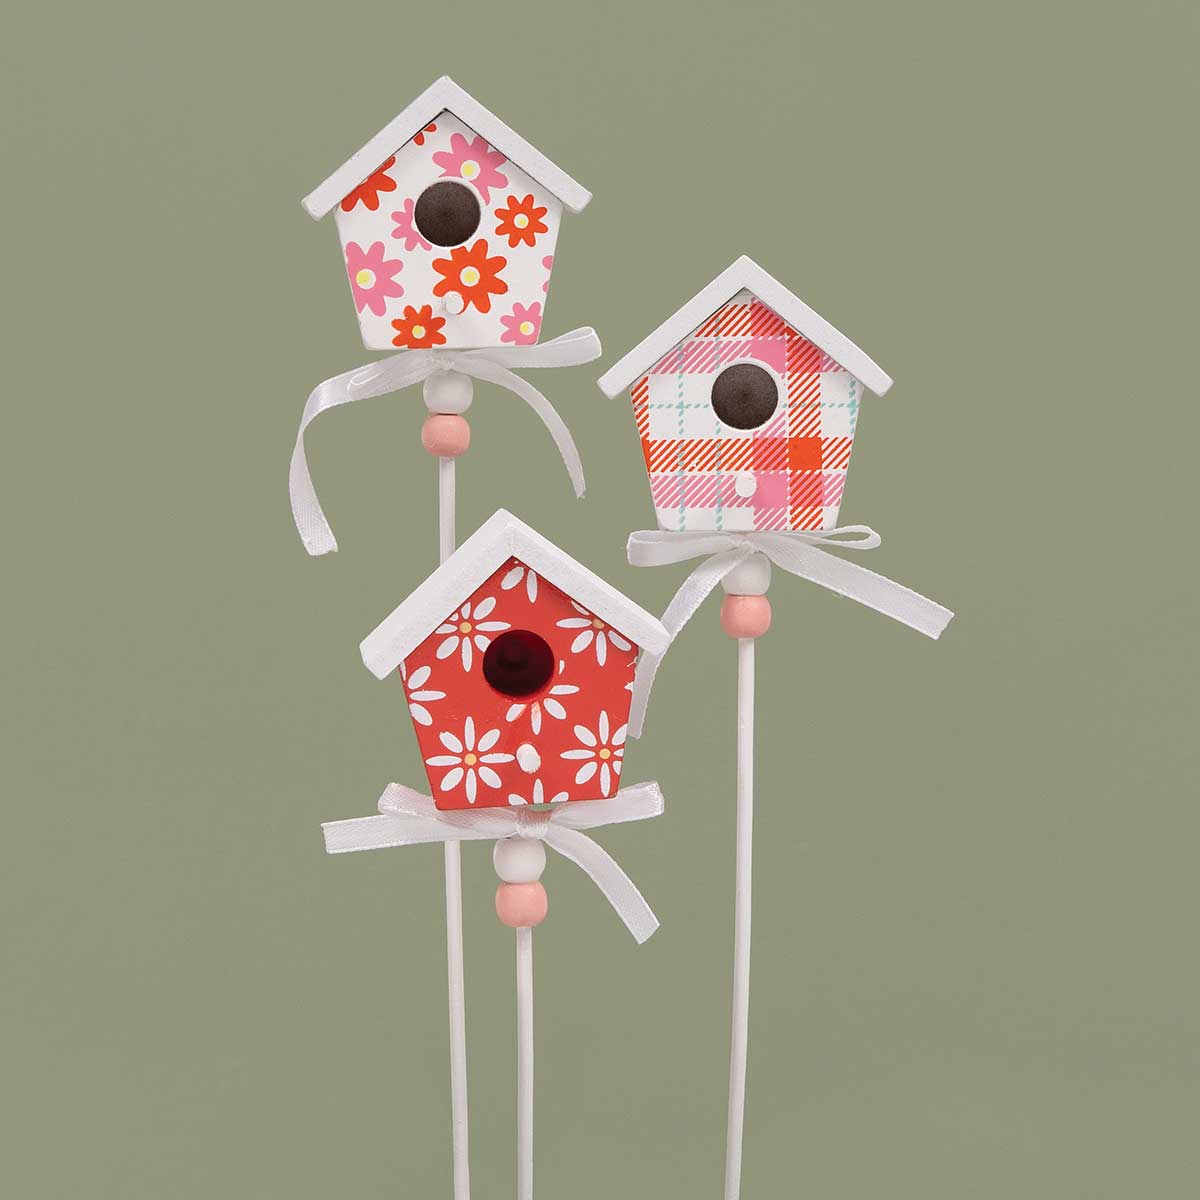 b50 BIRDHOUSE ON STICK 3 ASSORTED 2.25IN X 1IN X 2.25IN WOOD - Click Image to Close